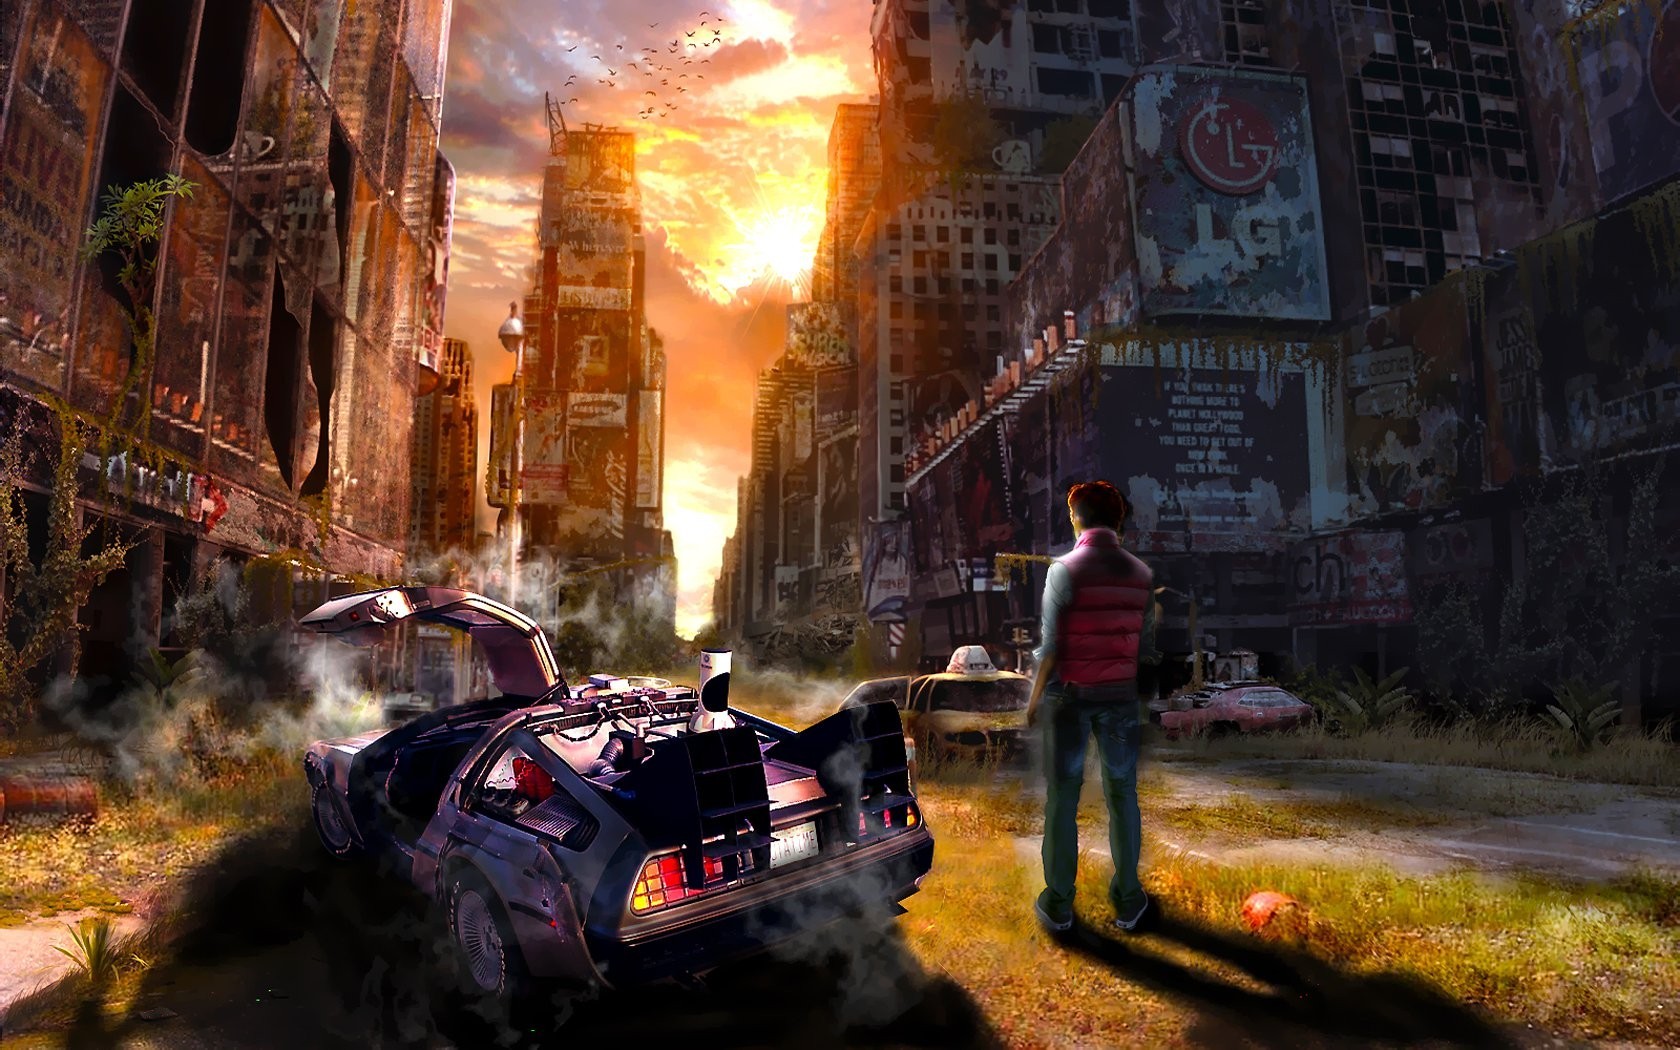 General 1680x1050 dystopian Back to the Future time travel car vehicle futuristic apocalyptic artwork DeLorean silver cars Time Machine cityscape New York City sunlight science fiction